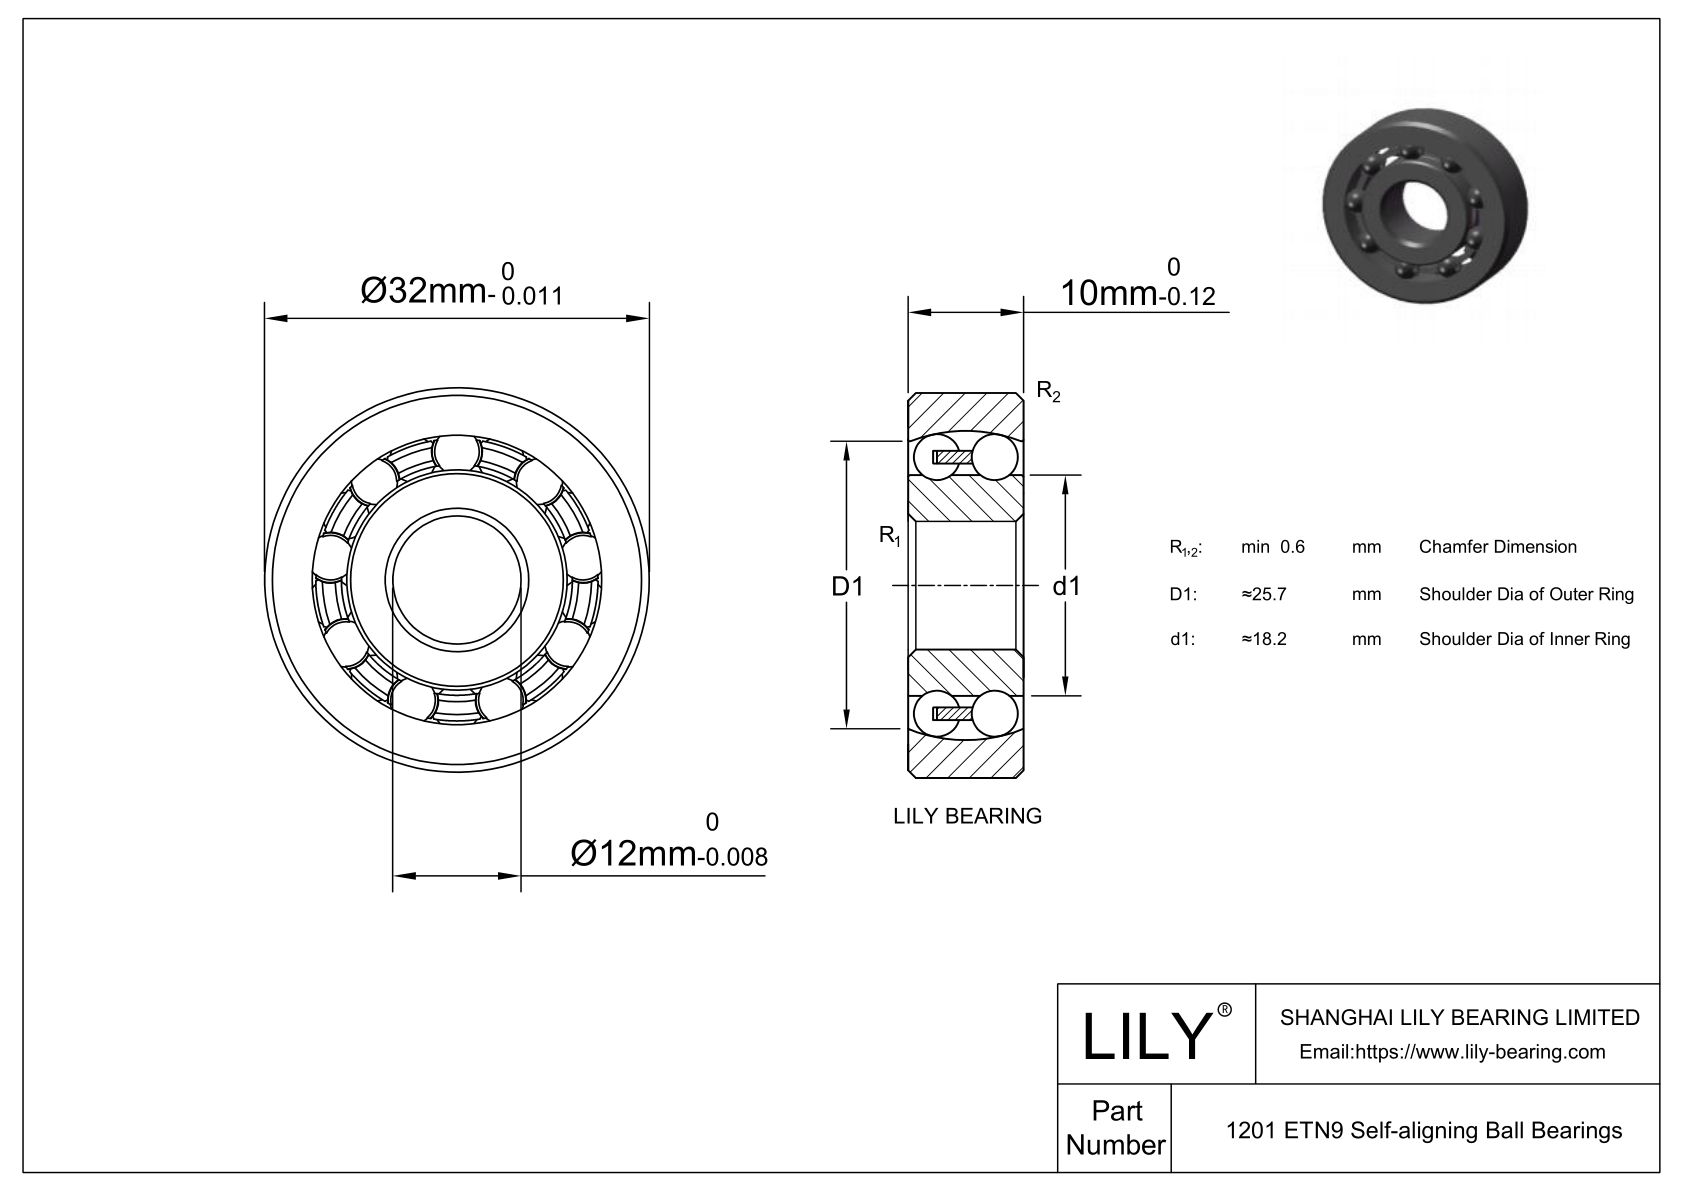 CE1201SC Silicon Carbide Self Aligning Ball Bearings cad drawing